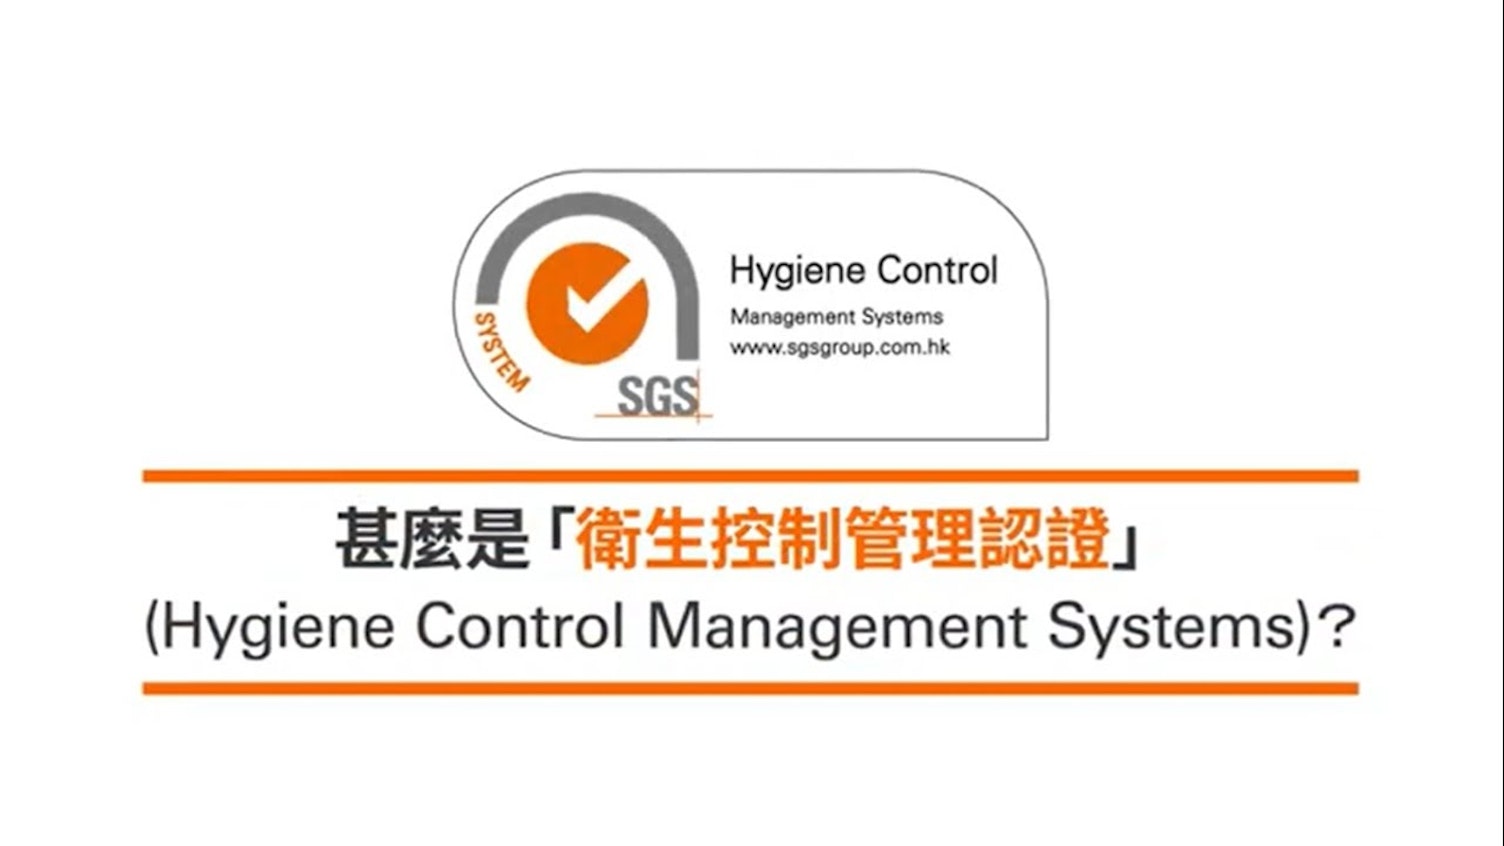 Hygiene Control Management Systems Certification